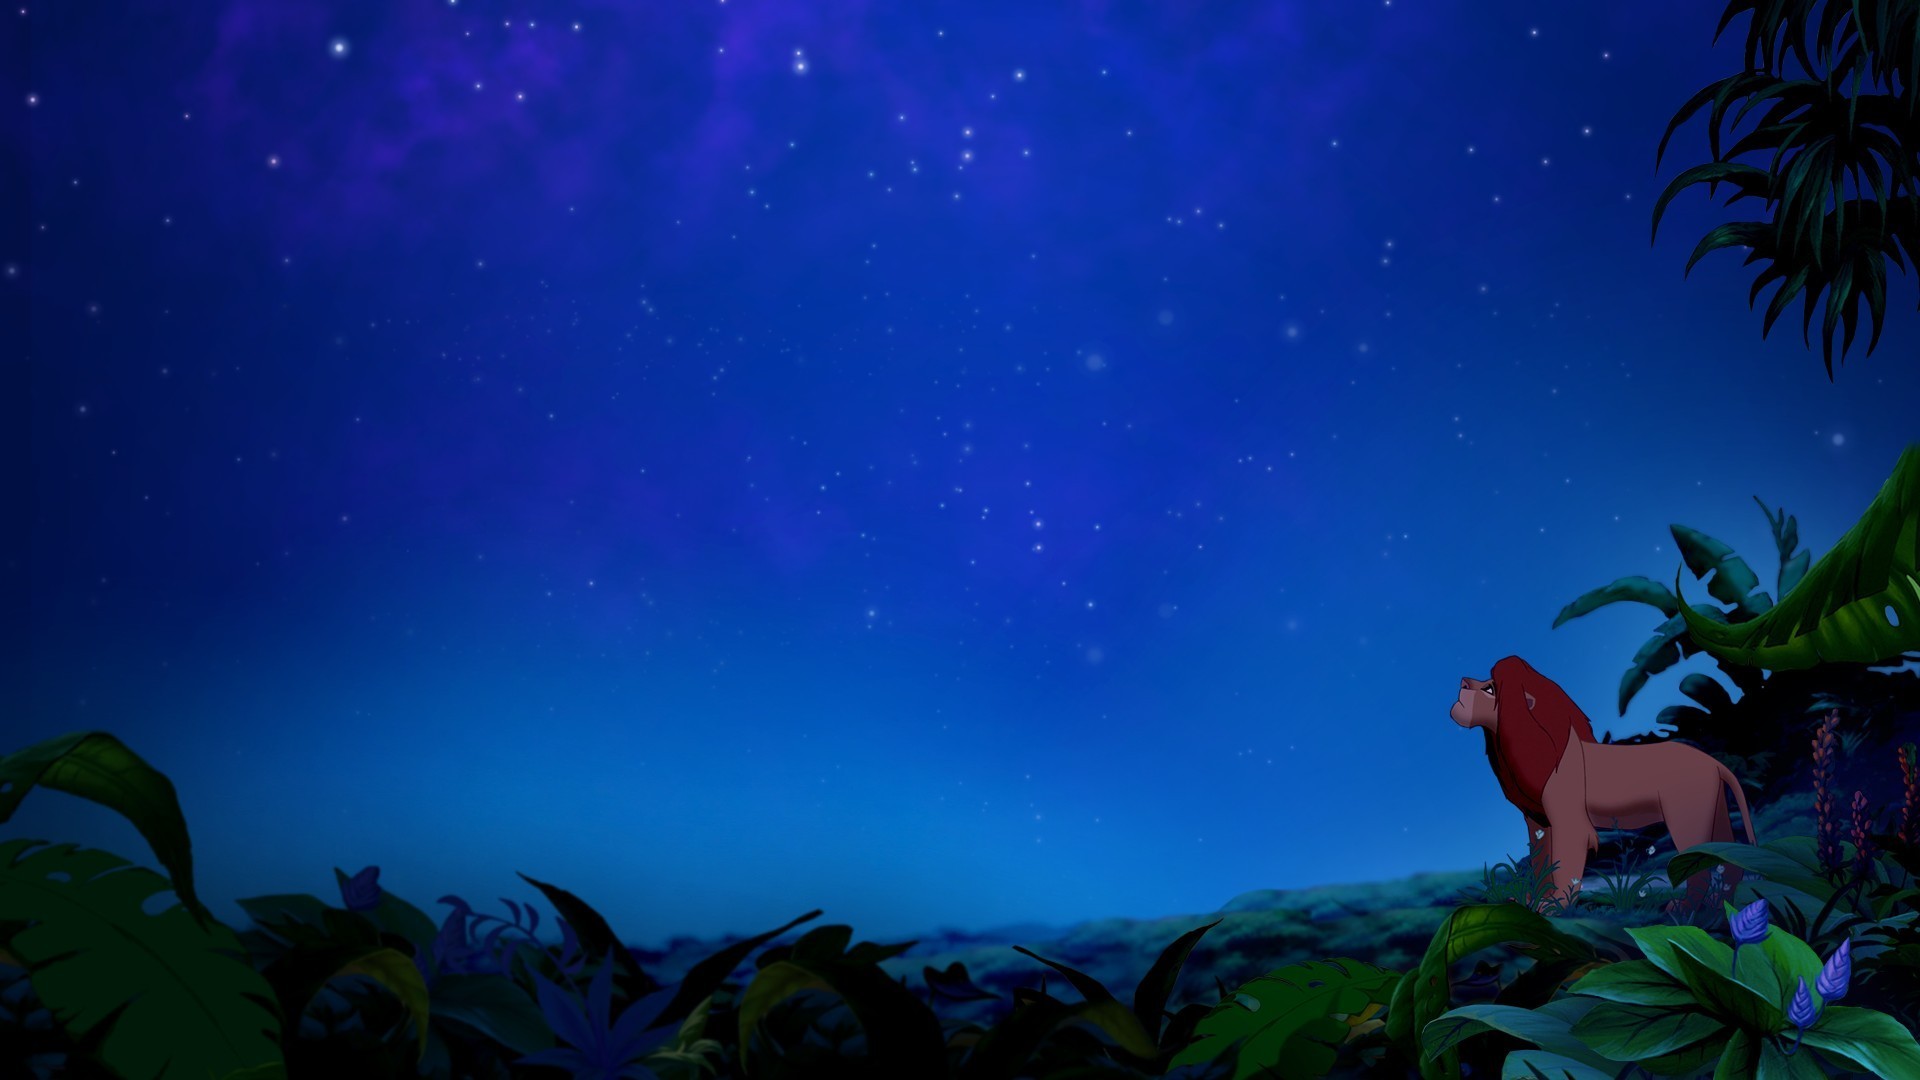 1920x1080 Animated movies the lion king jungle night sky wallpaper